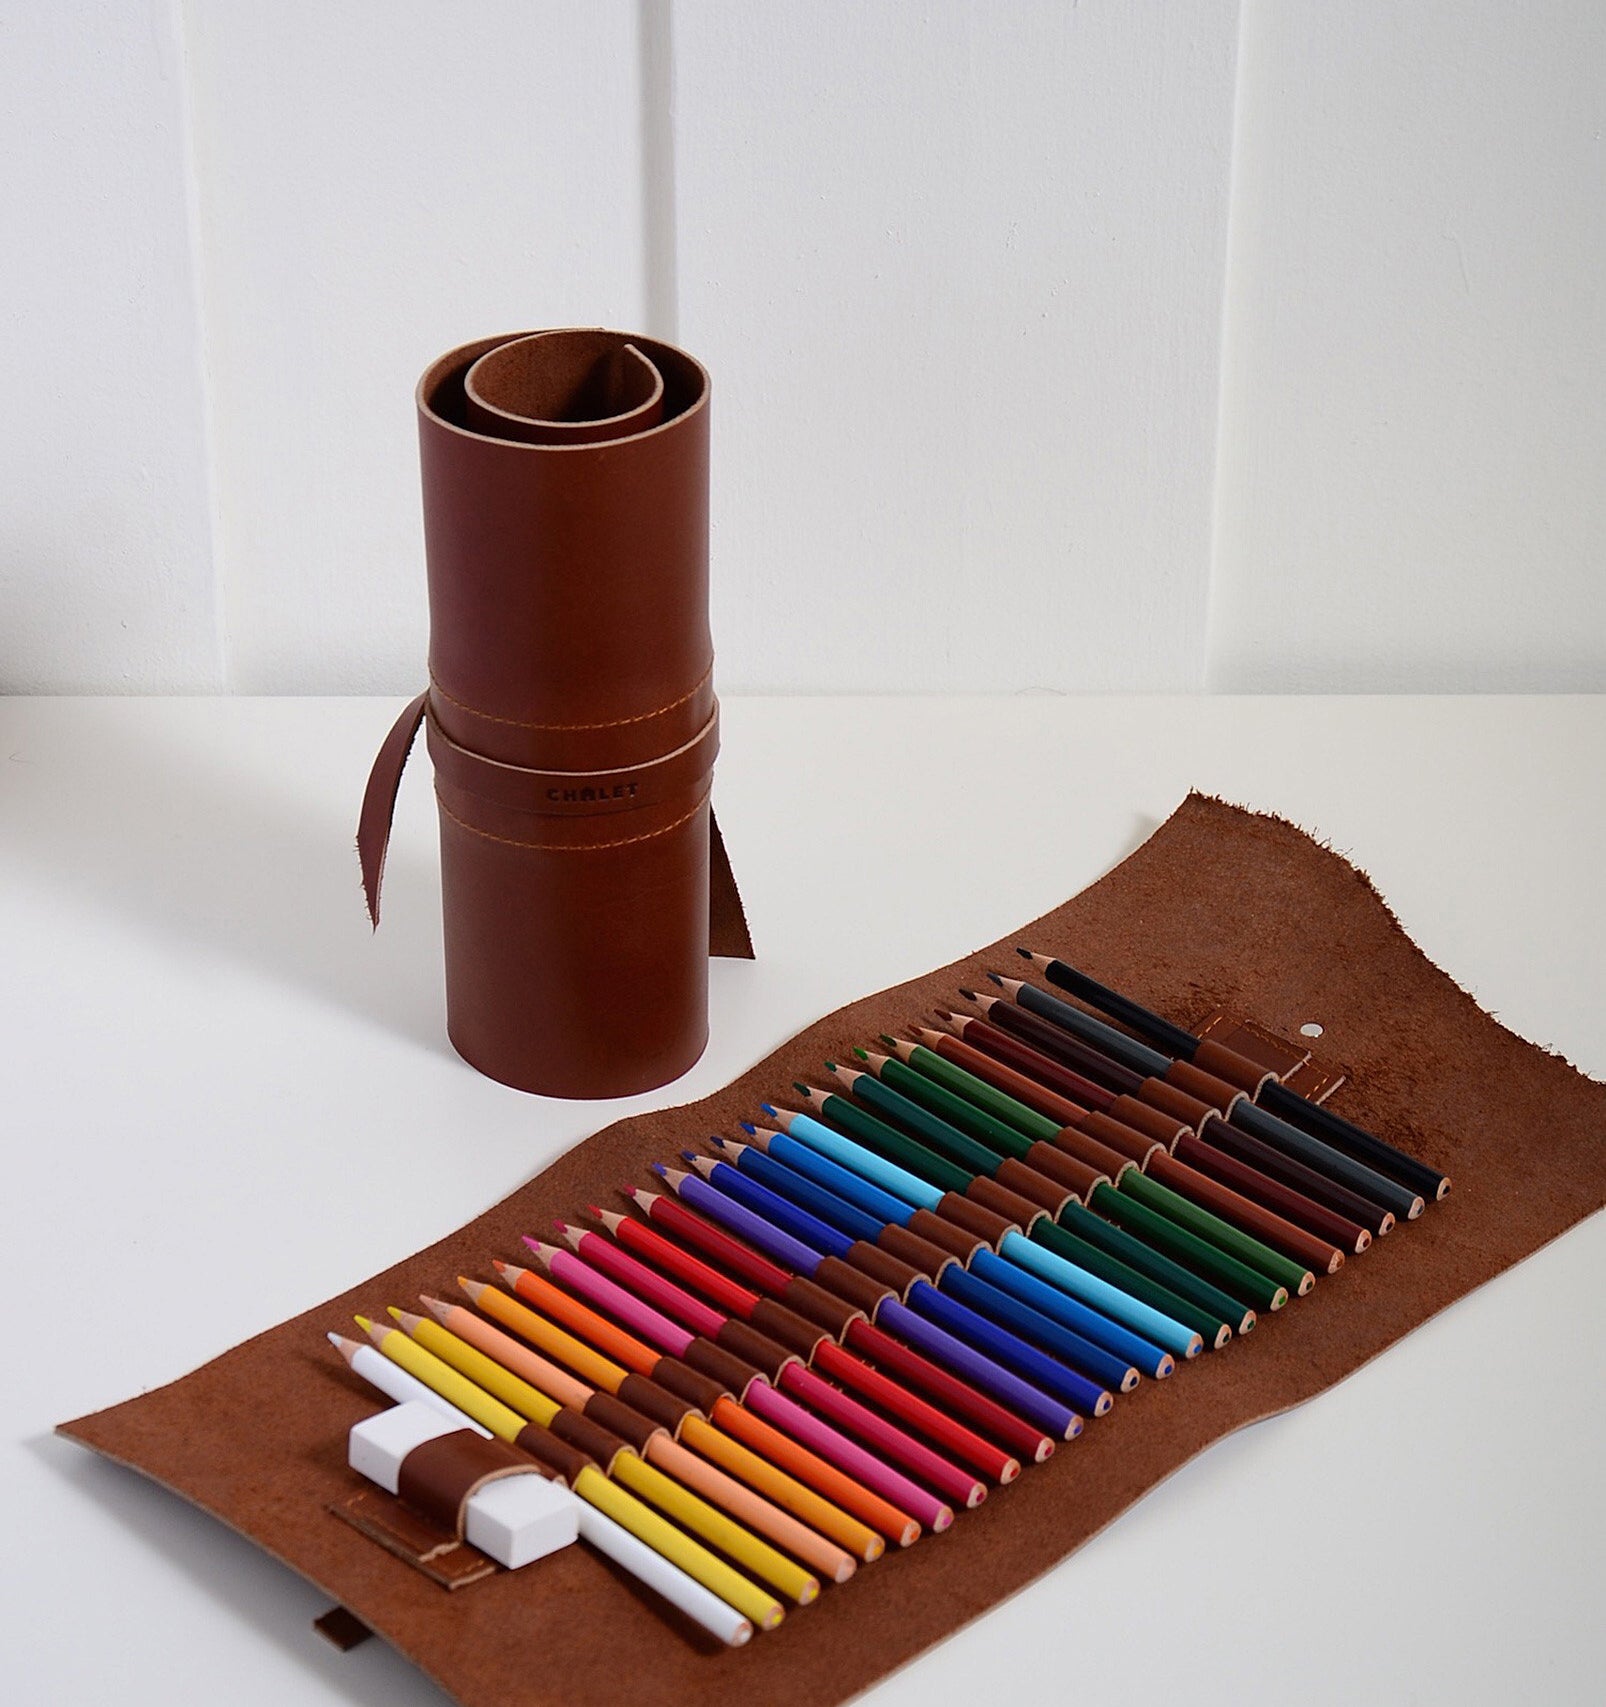 A leather roll plus one unravelled that show the coloured pencils inside